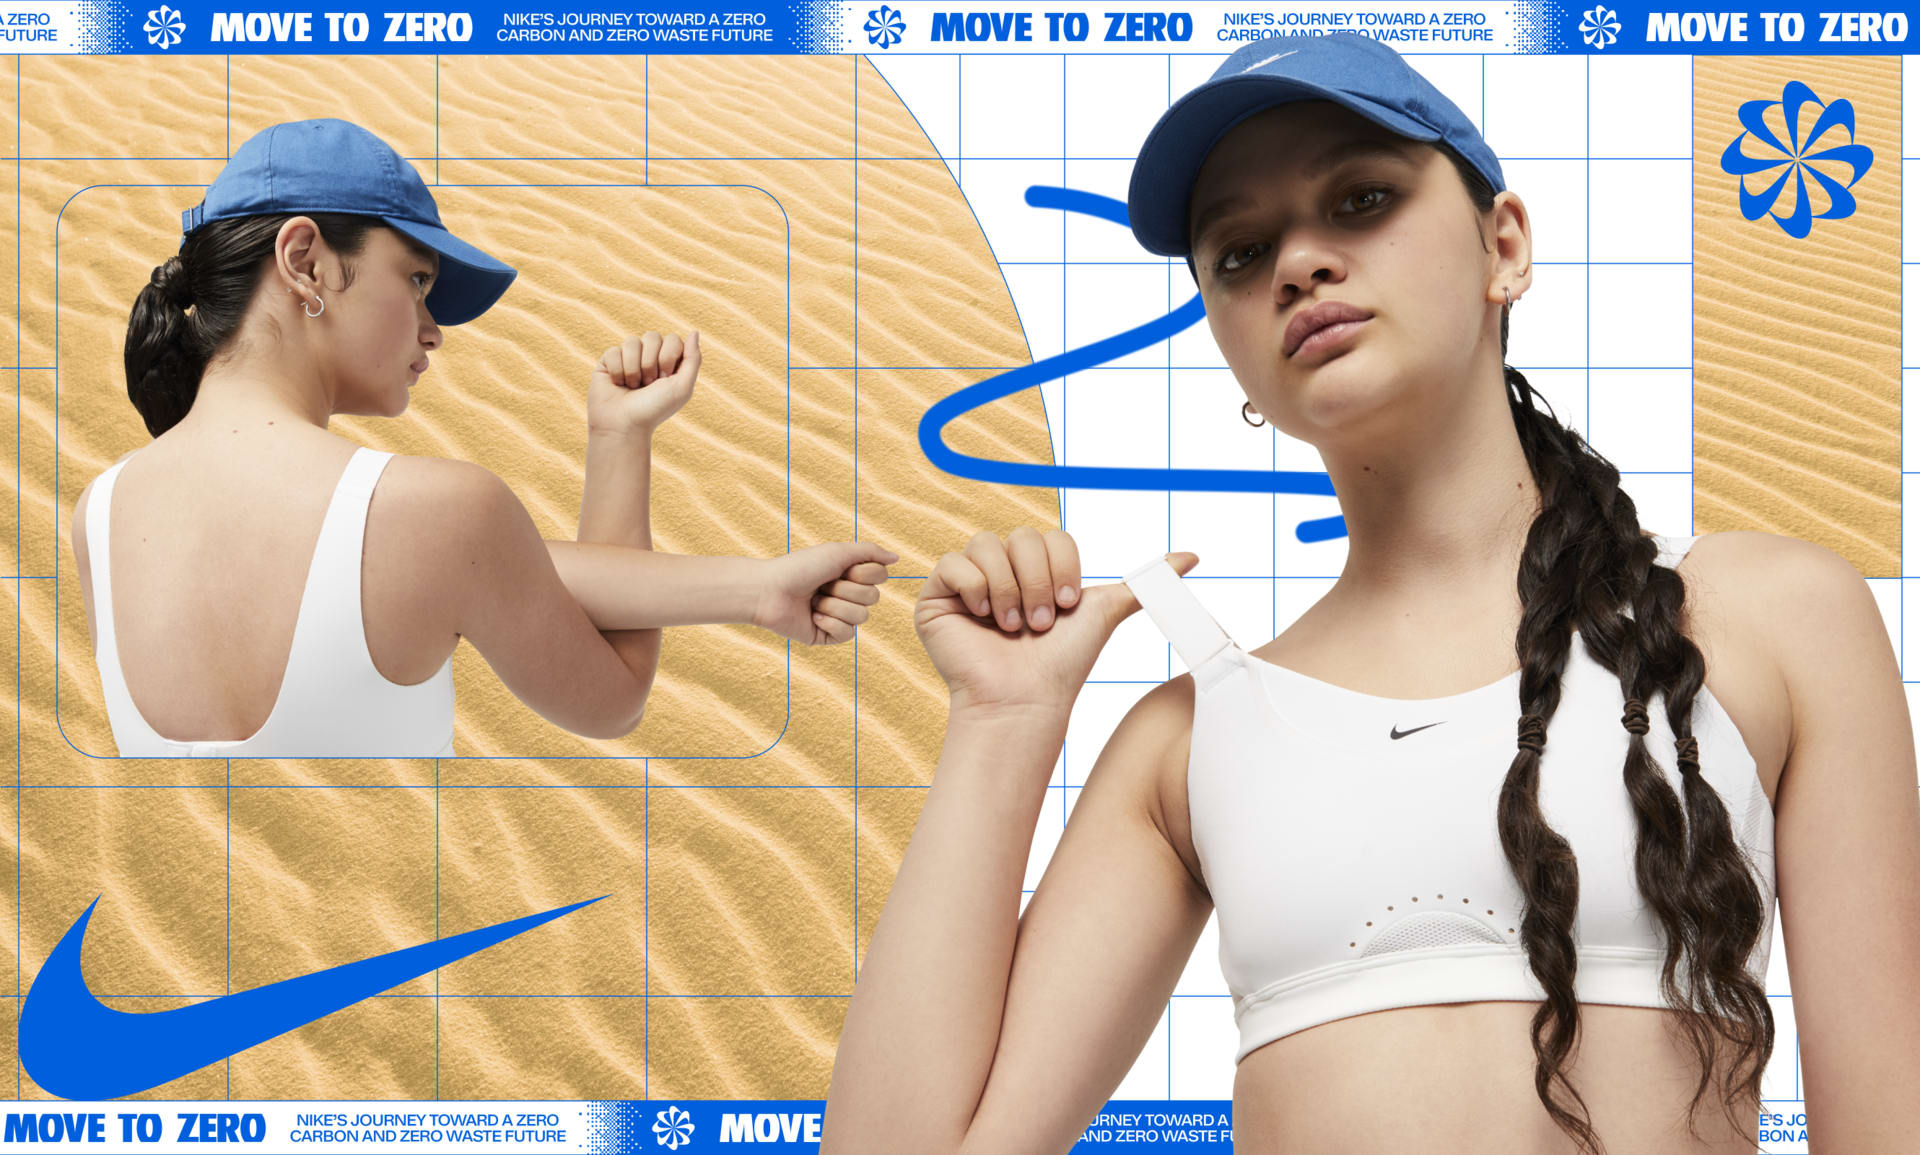 Buy Nike Alpha High Support Sports Bra from Next Germany